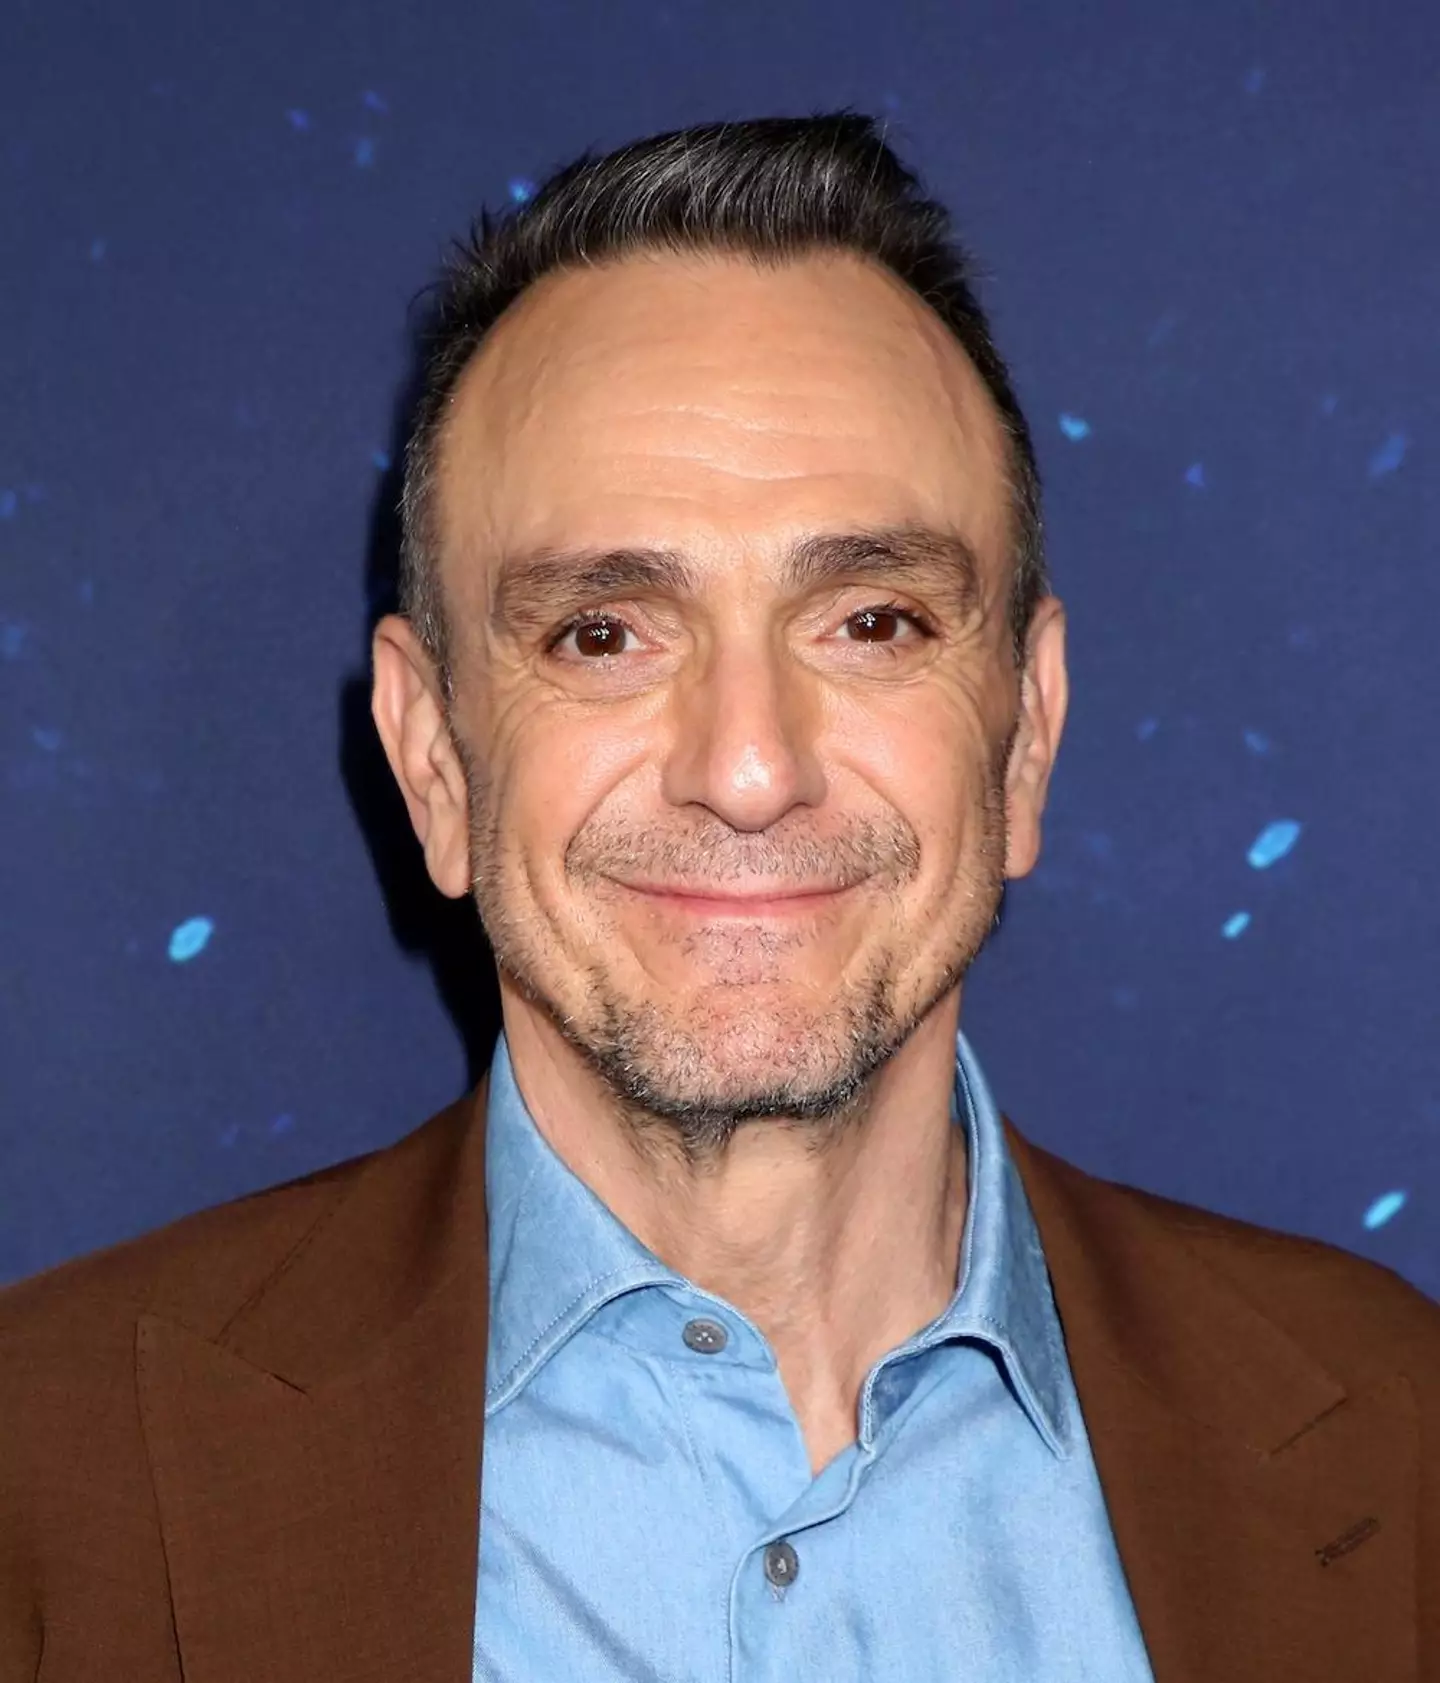 Hank Azaria stepped down from a number of roles but continues to avoid numerous characters.